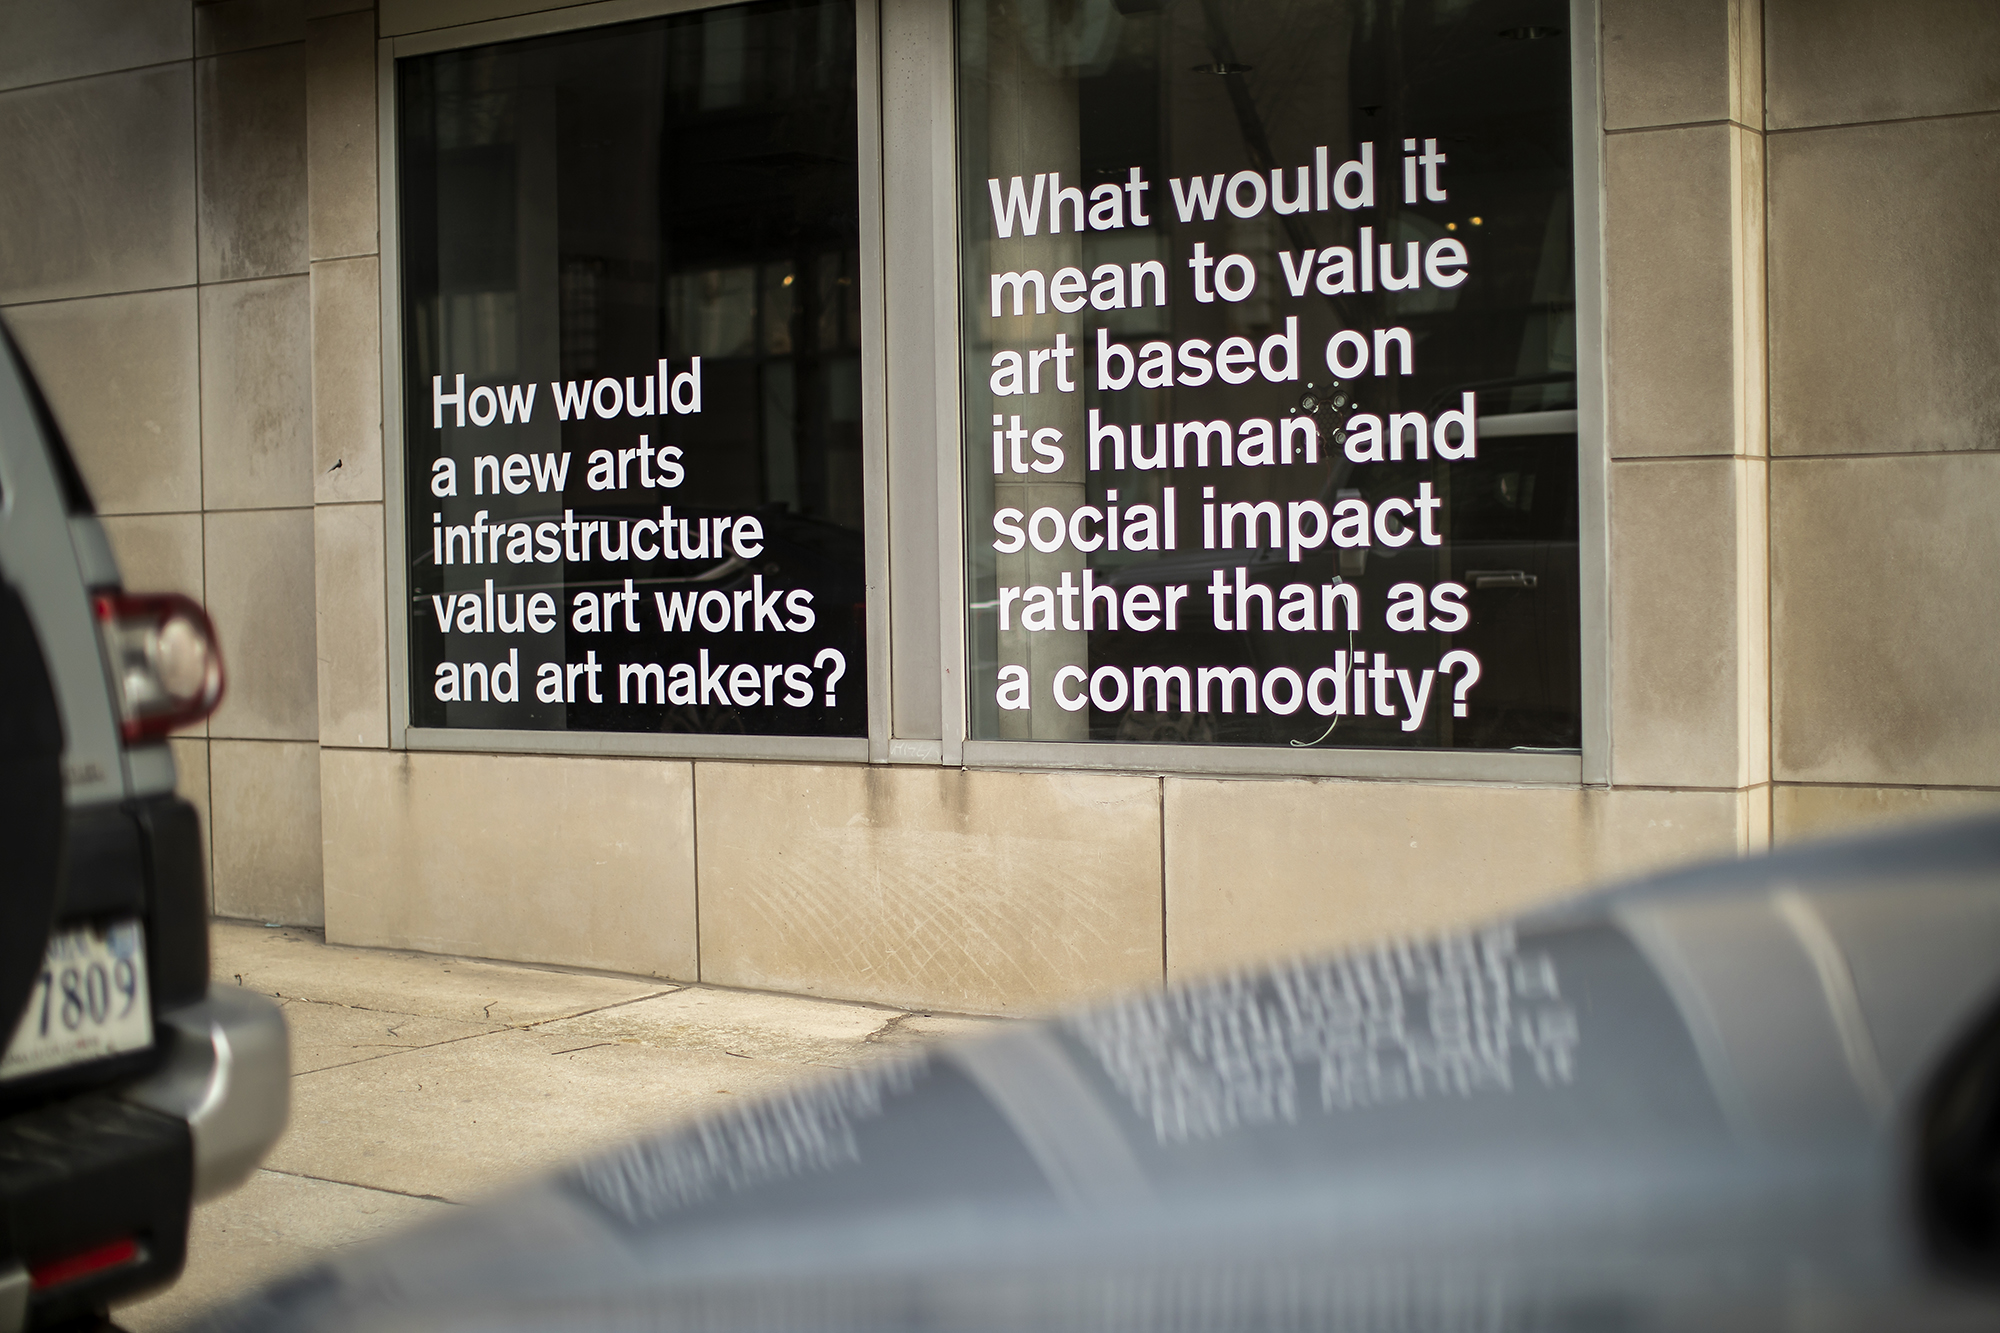 How would a new arts infrastructure value art works and art makers? What would it mean to value art based on its human and social impact rather than as a commodity?